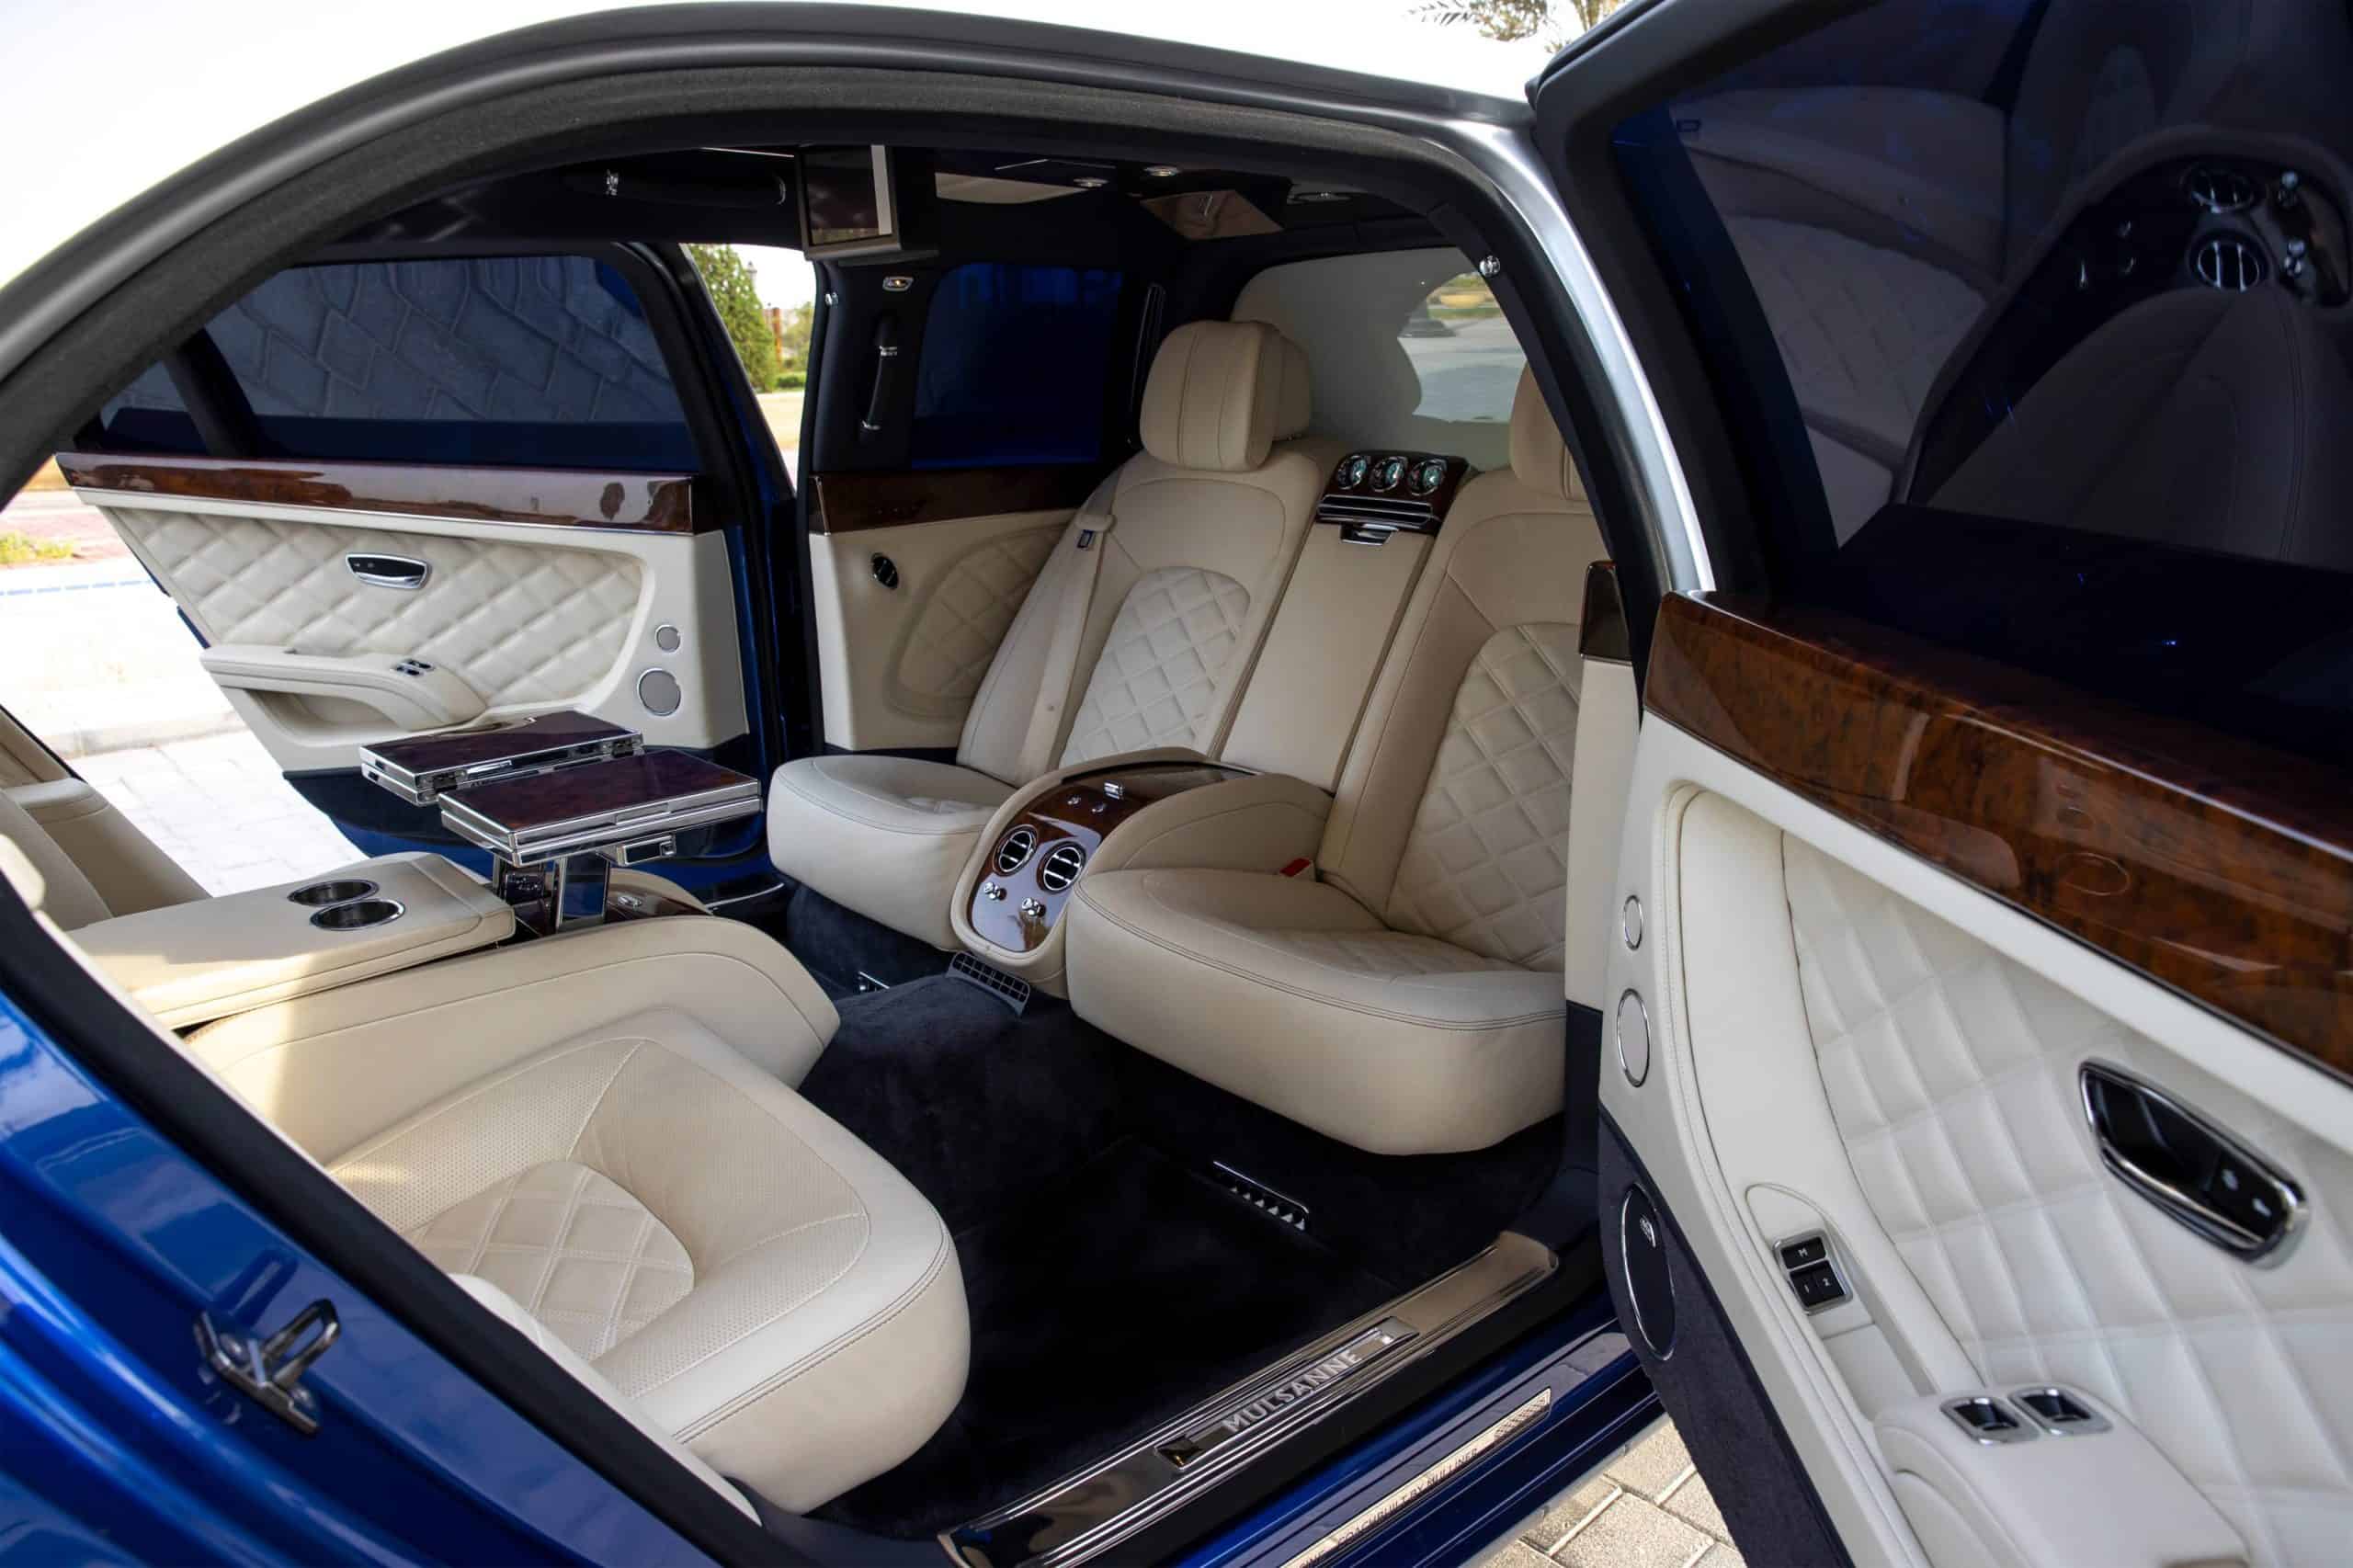 Here's your chance to own the ultimate luxury four door, the Mulsanne Grand Limousine by Mulliner